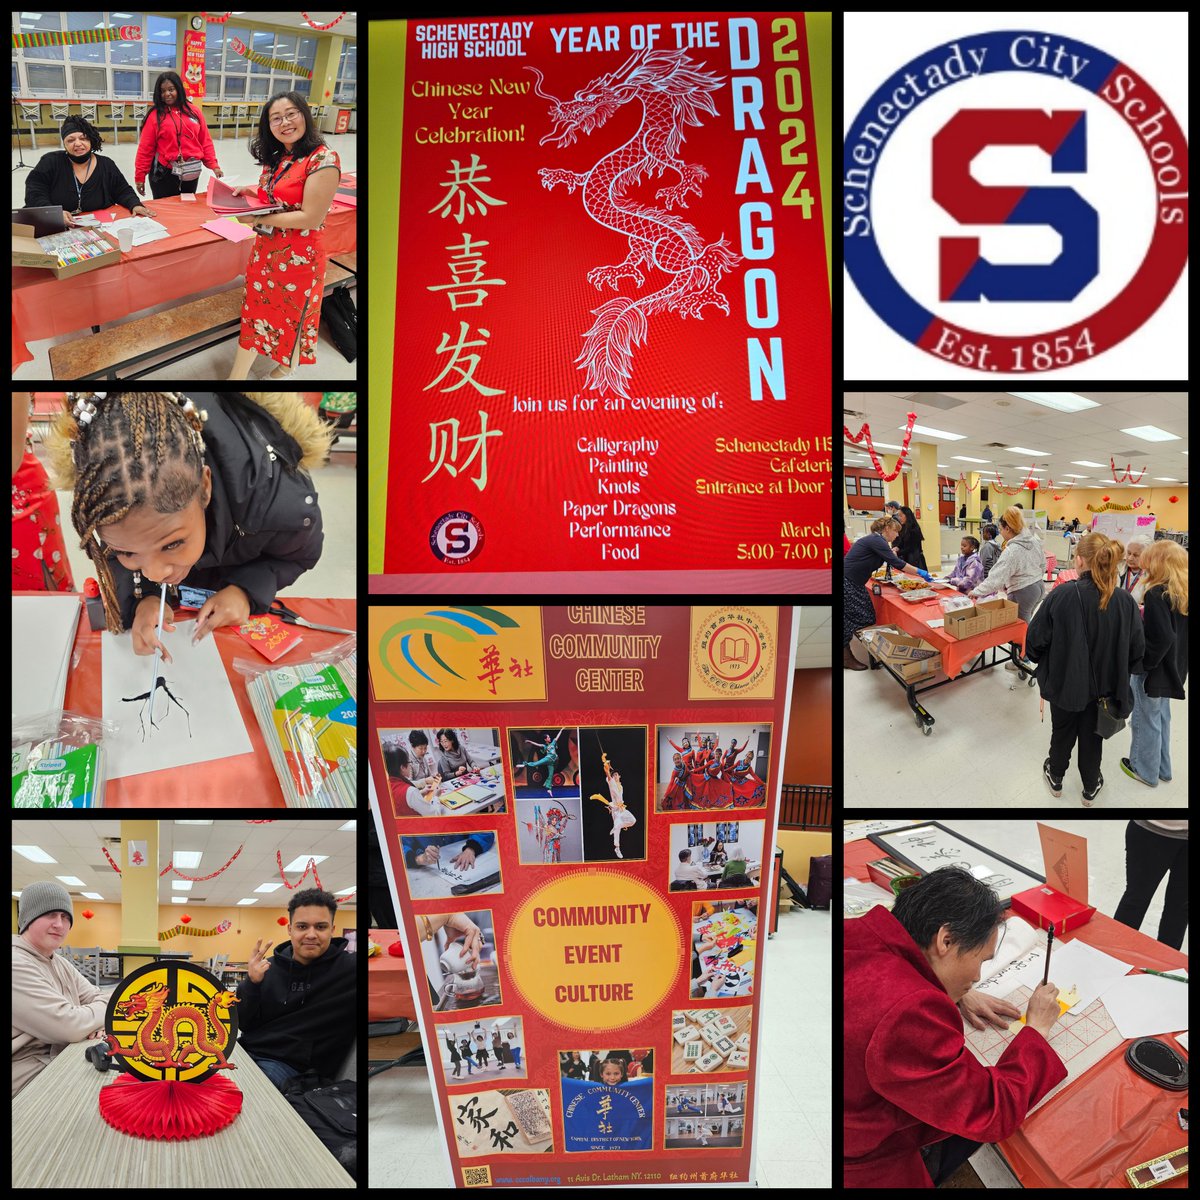 Awesome evening at SHS celebrating the Chinese New Year. Thank you, Ms. Hoffmann and Ms. Dong for a beautiful evening and to the Schenectady Chinese Community Center. #YearOfTheDragon #Diversity #Schenectadyrising